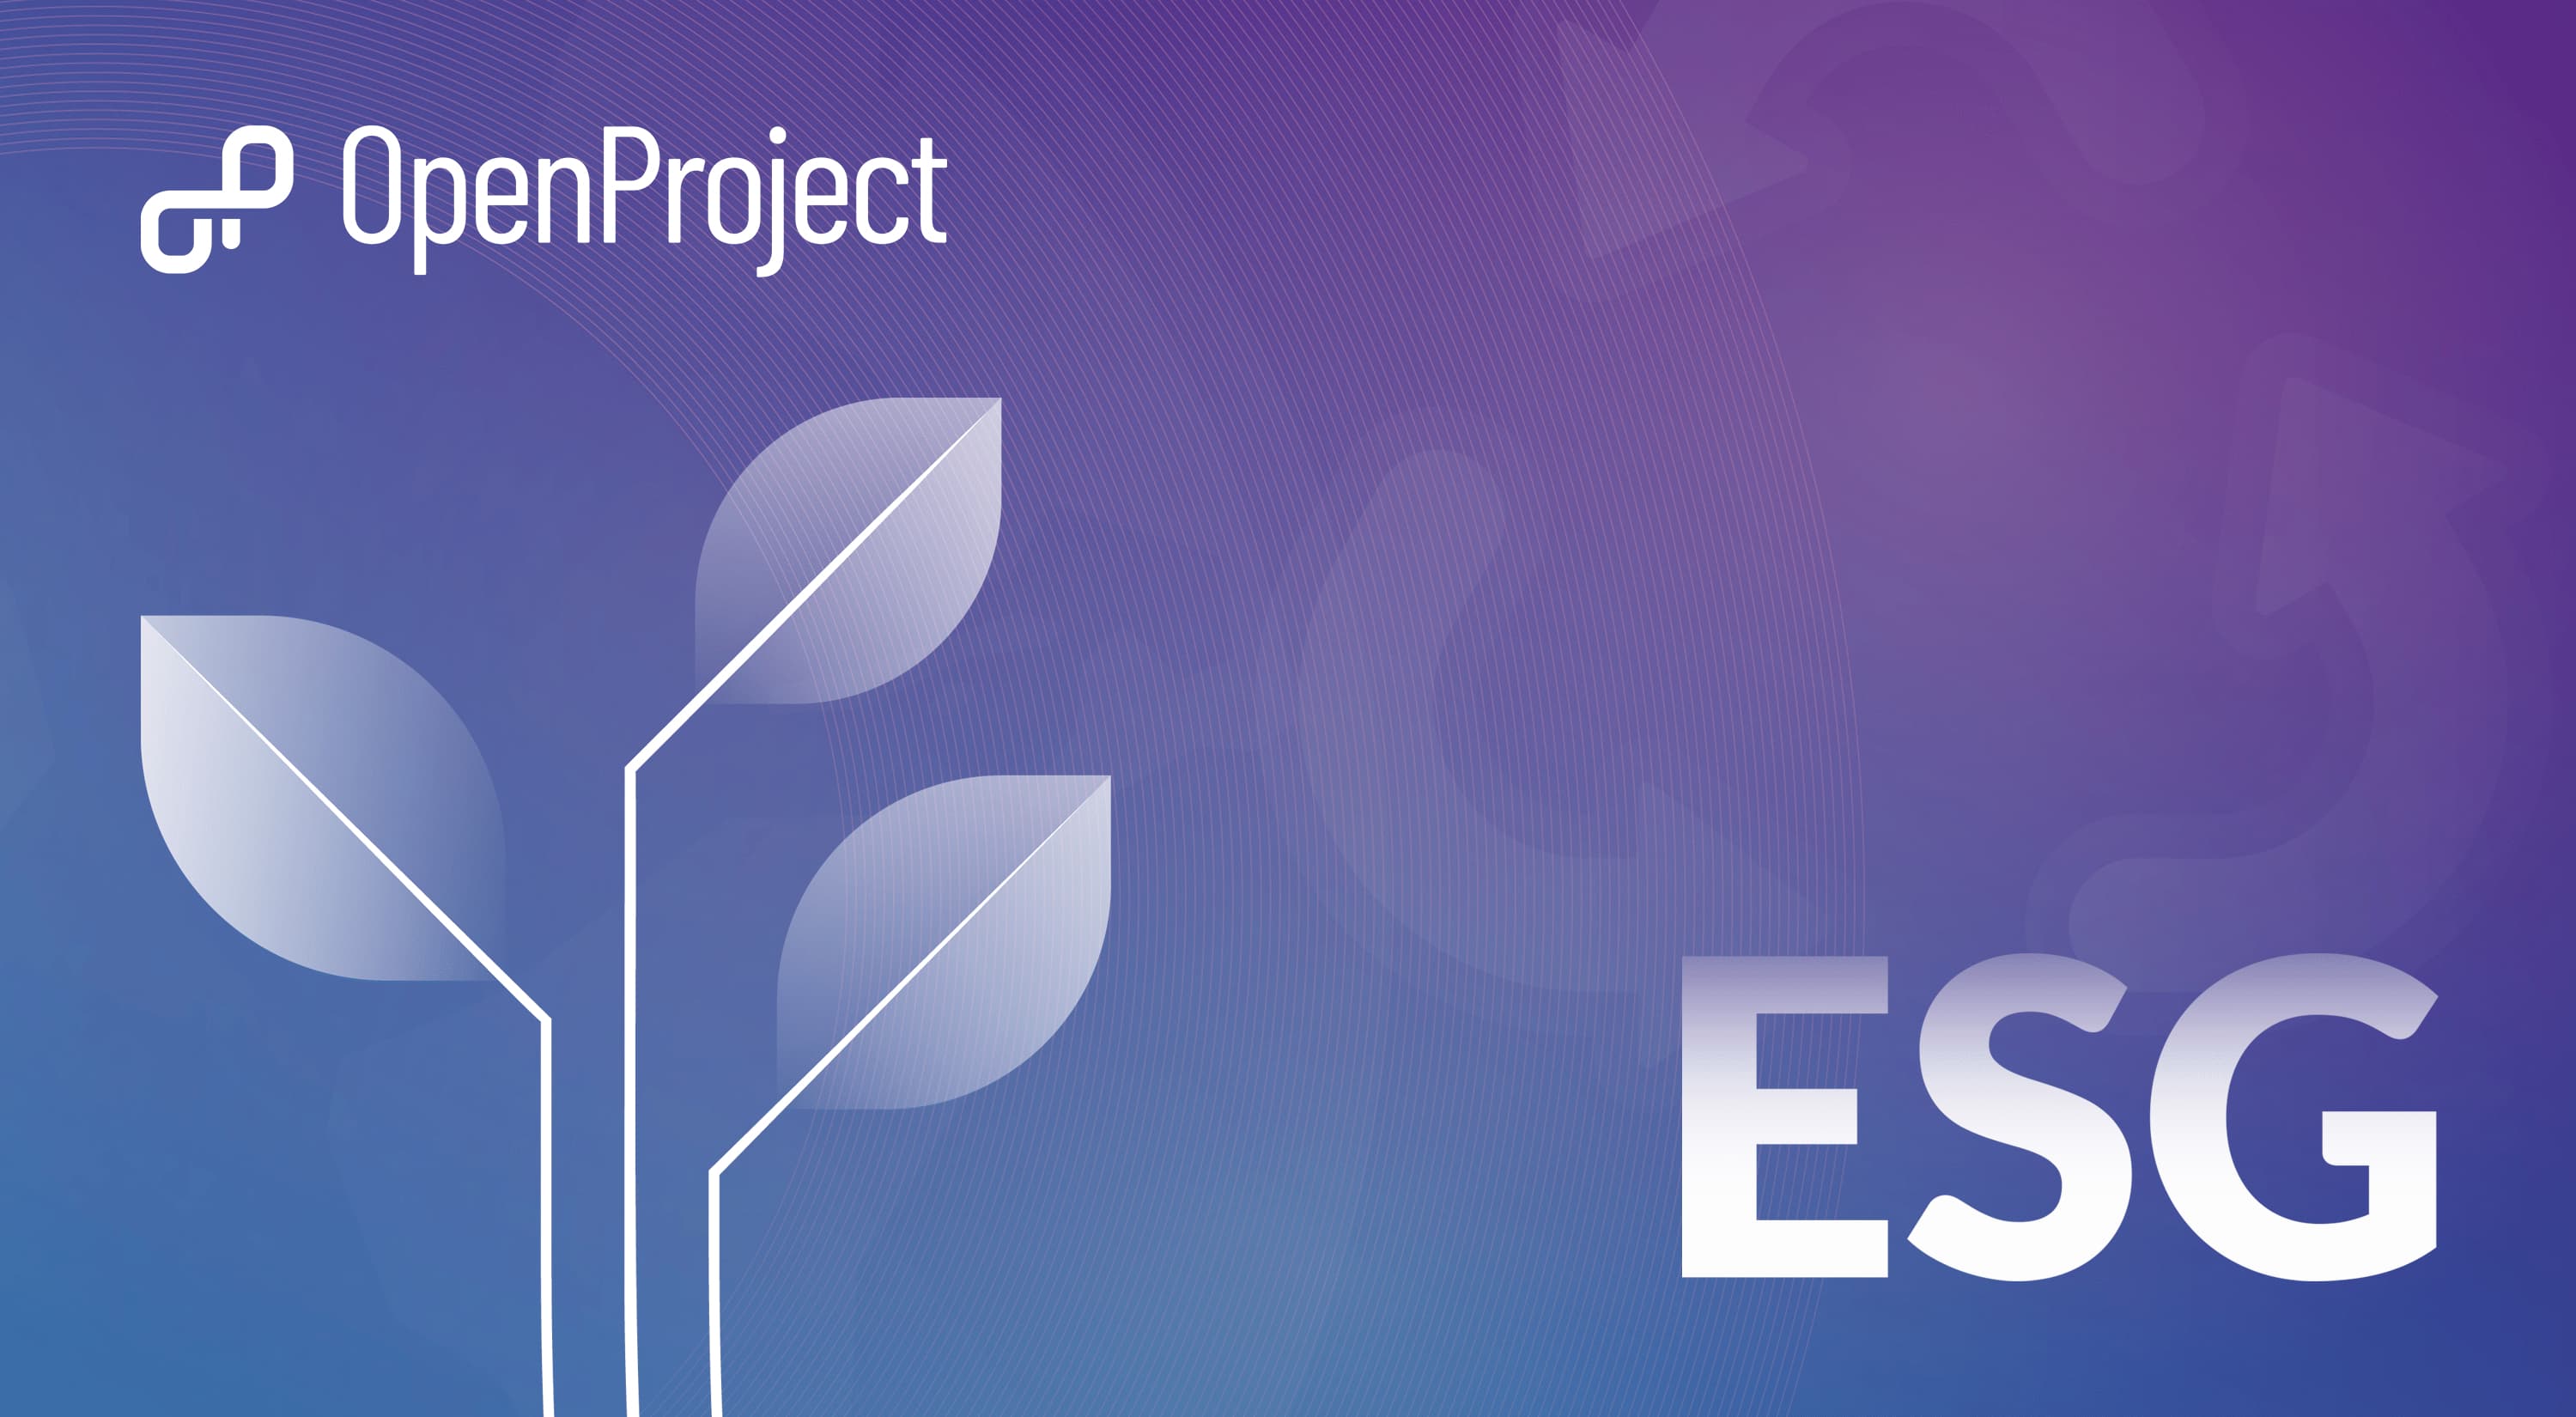 ESG: Our commitment to responsible environmental, social and governance practices